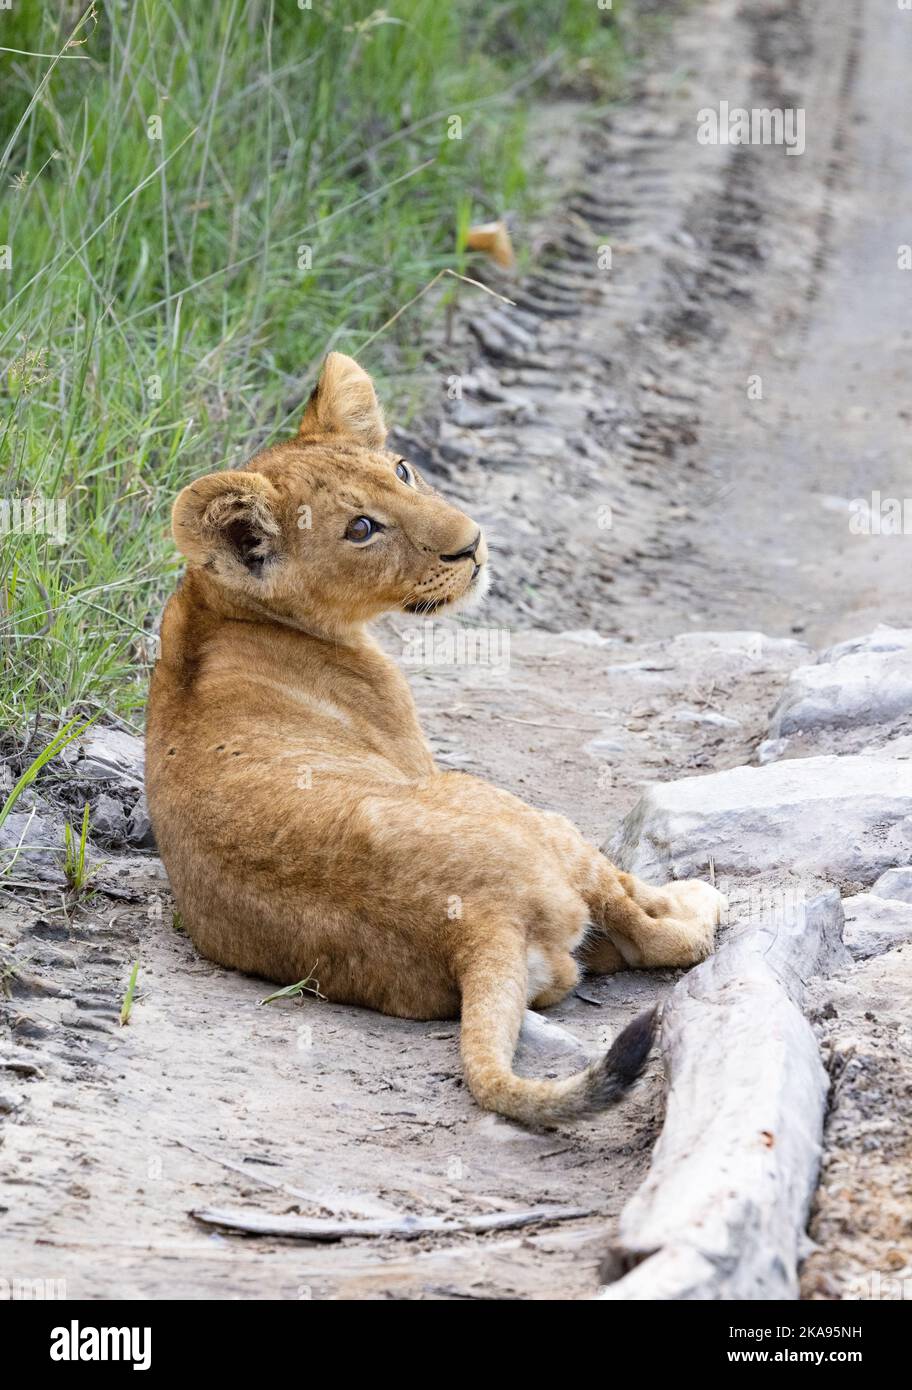 Lion cub Africa - 8 month old lion cub, Panthera leo, lying on the road, Moremi Game Reserve, Okavango Delta, Botswana Africa - young African animal. Stock Photo